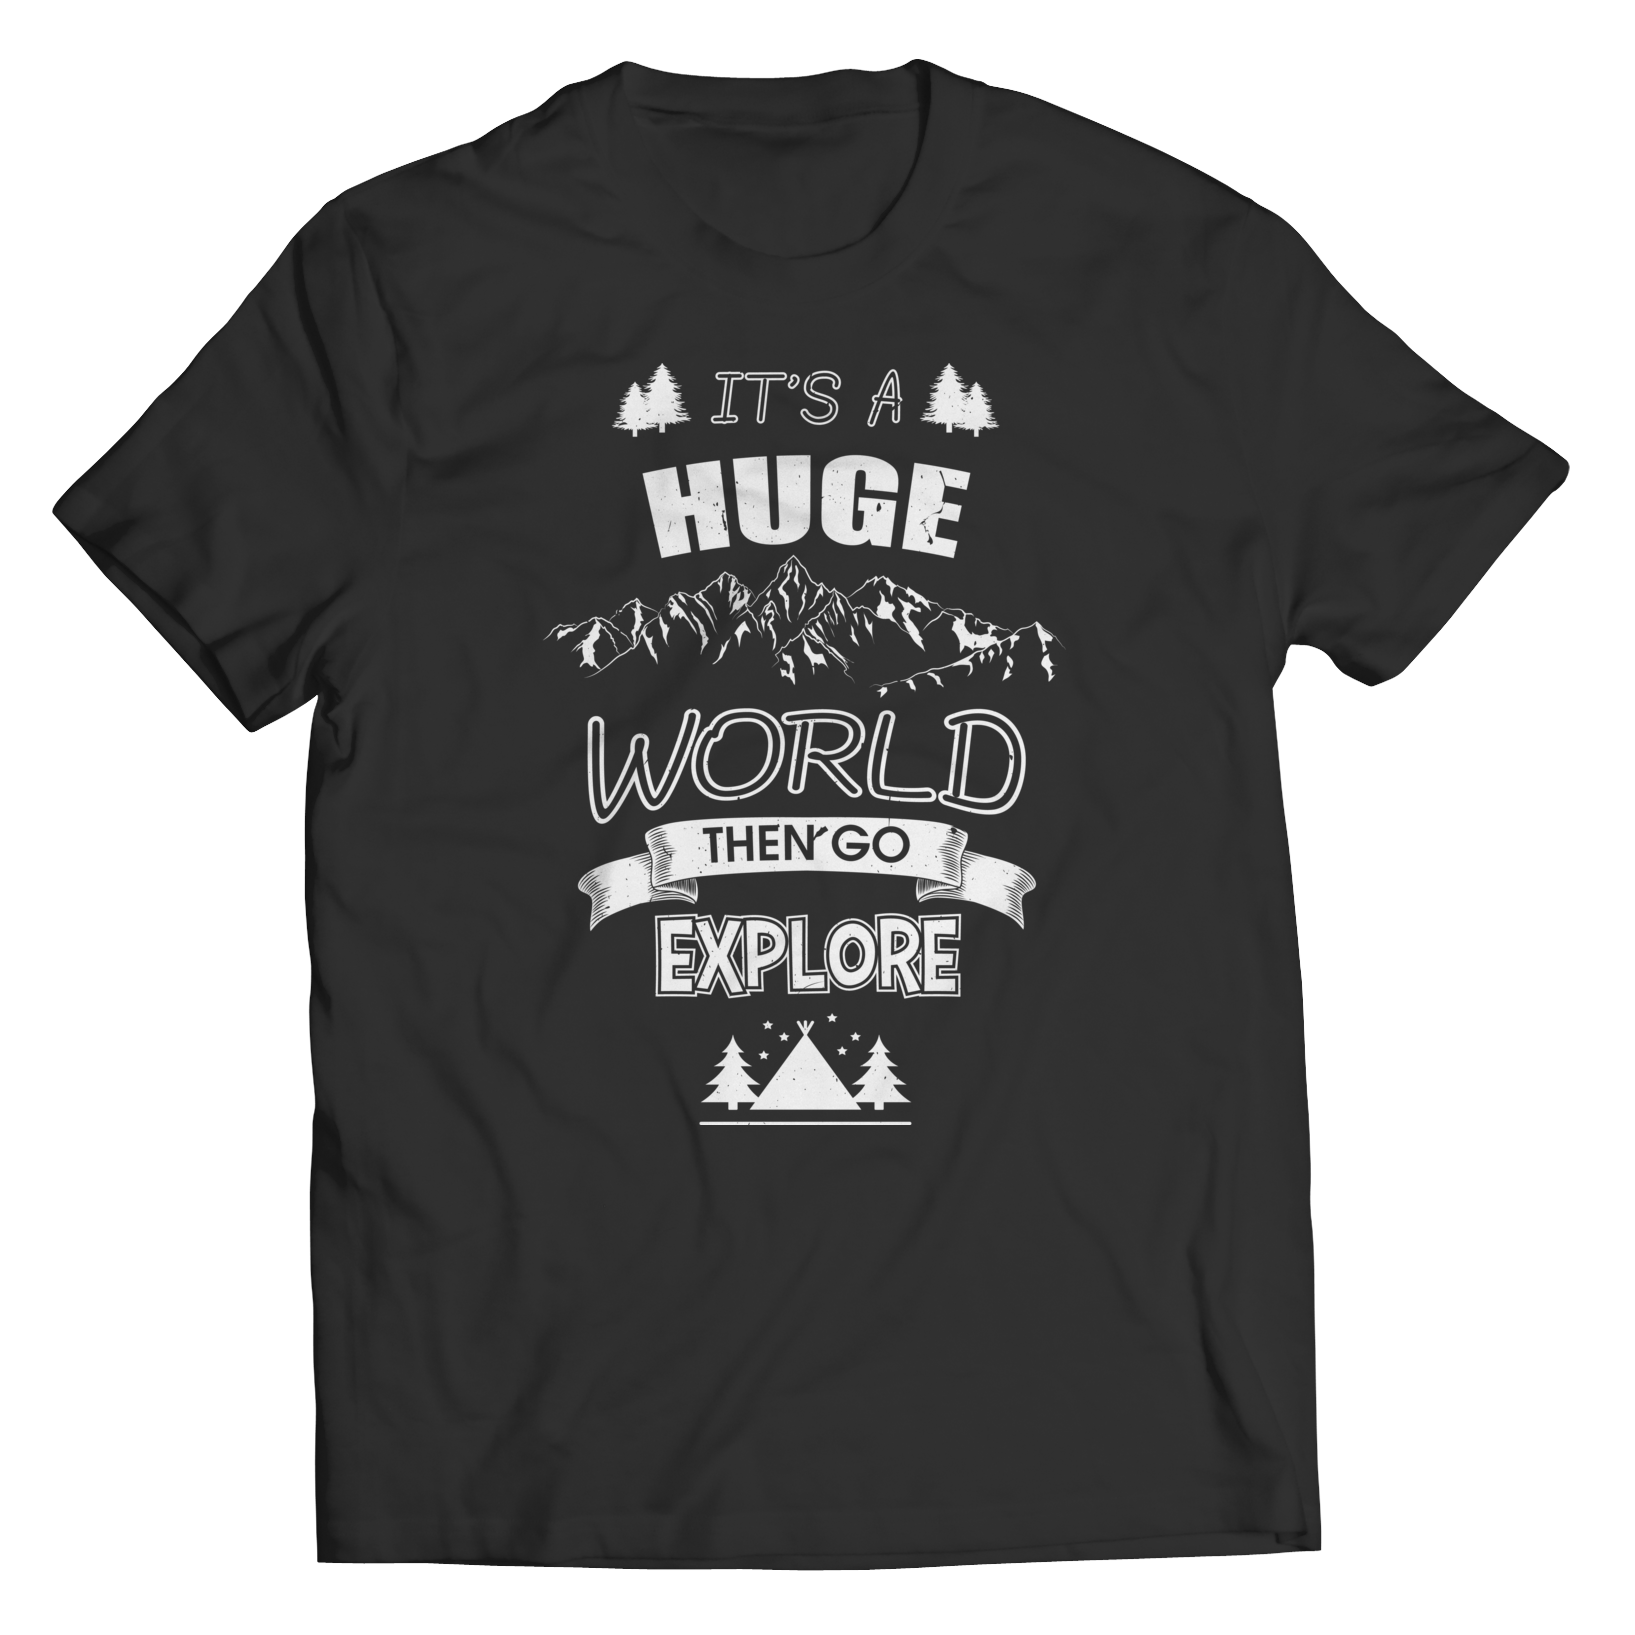 Explore The World - Youth Tees